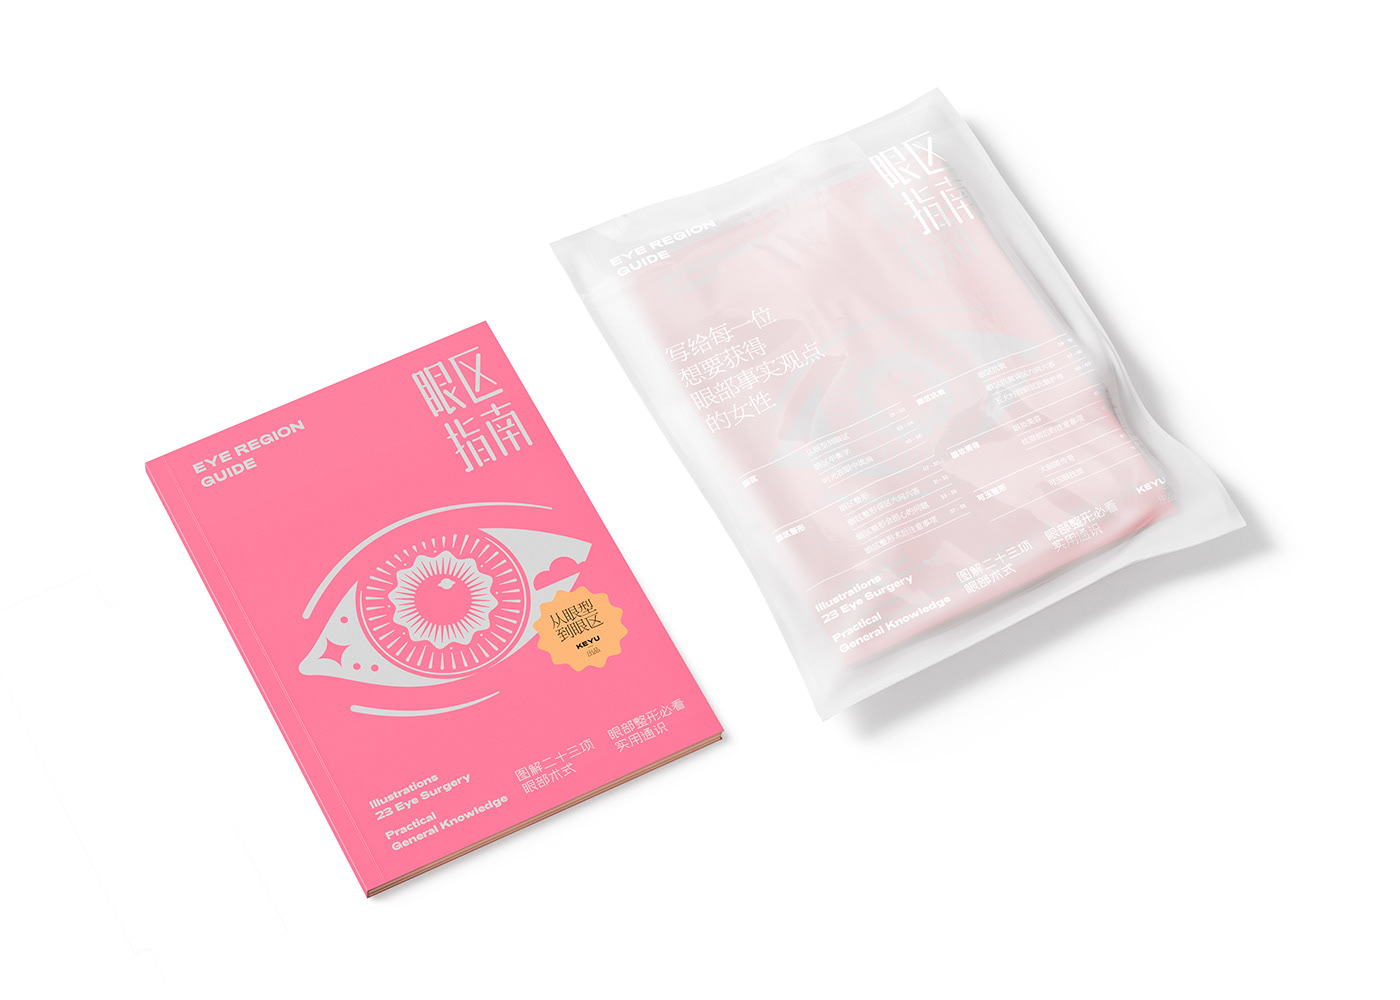 book hospital medical eye china editorial illustrator draw infographic pink doctor